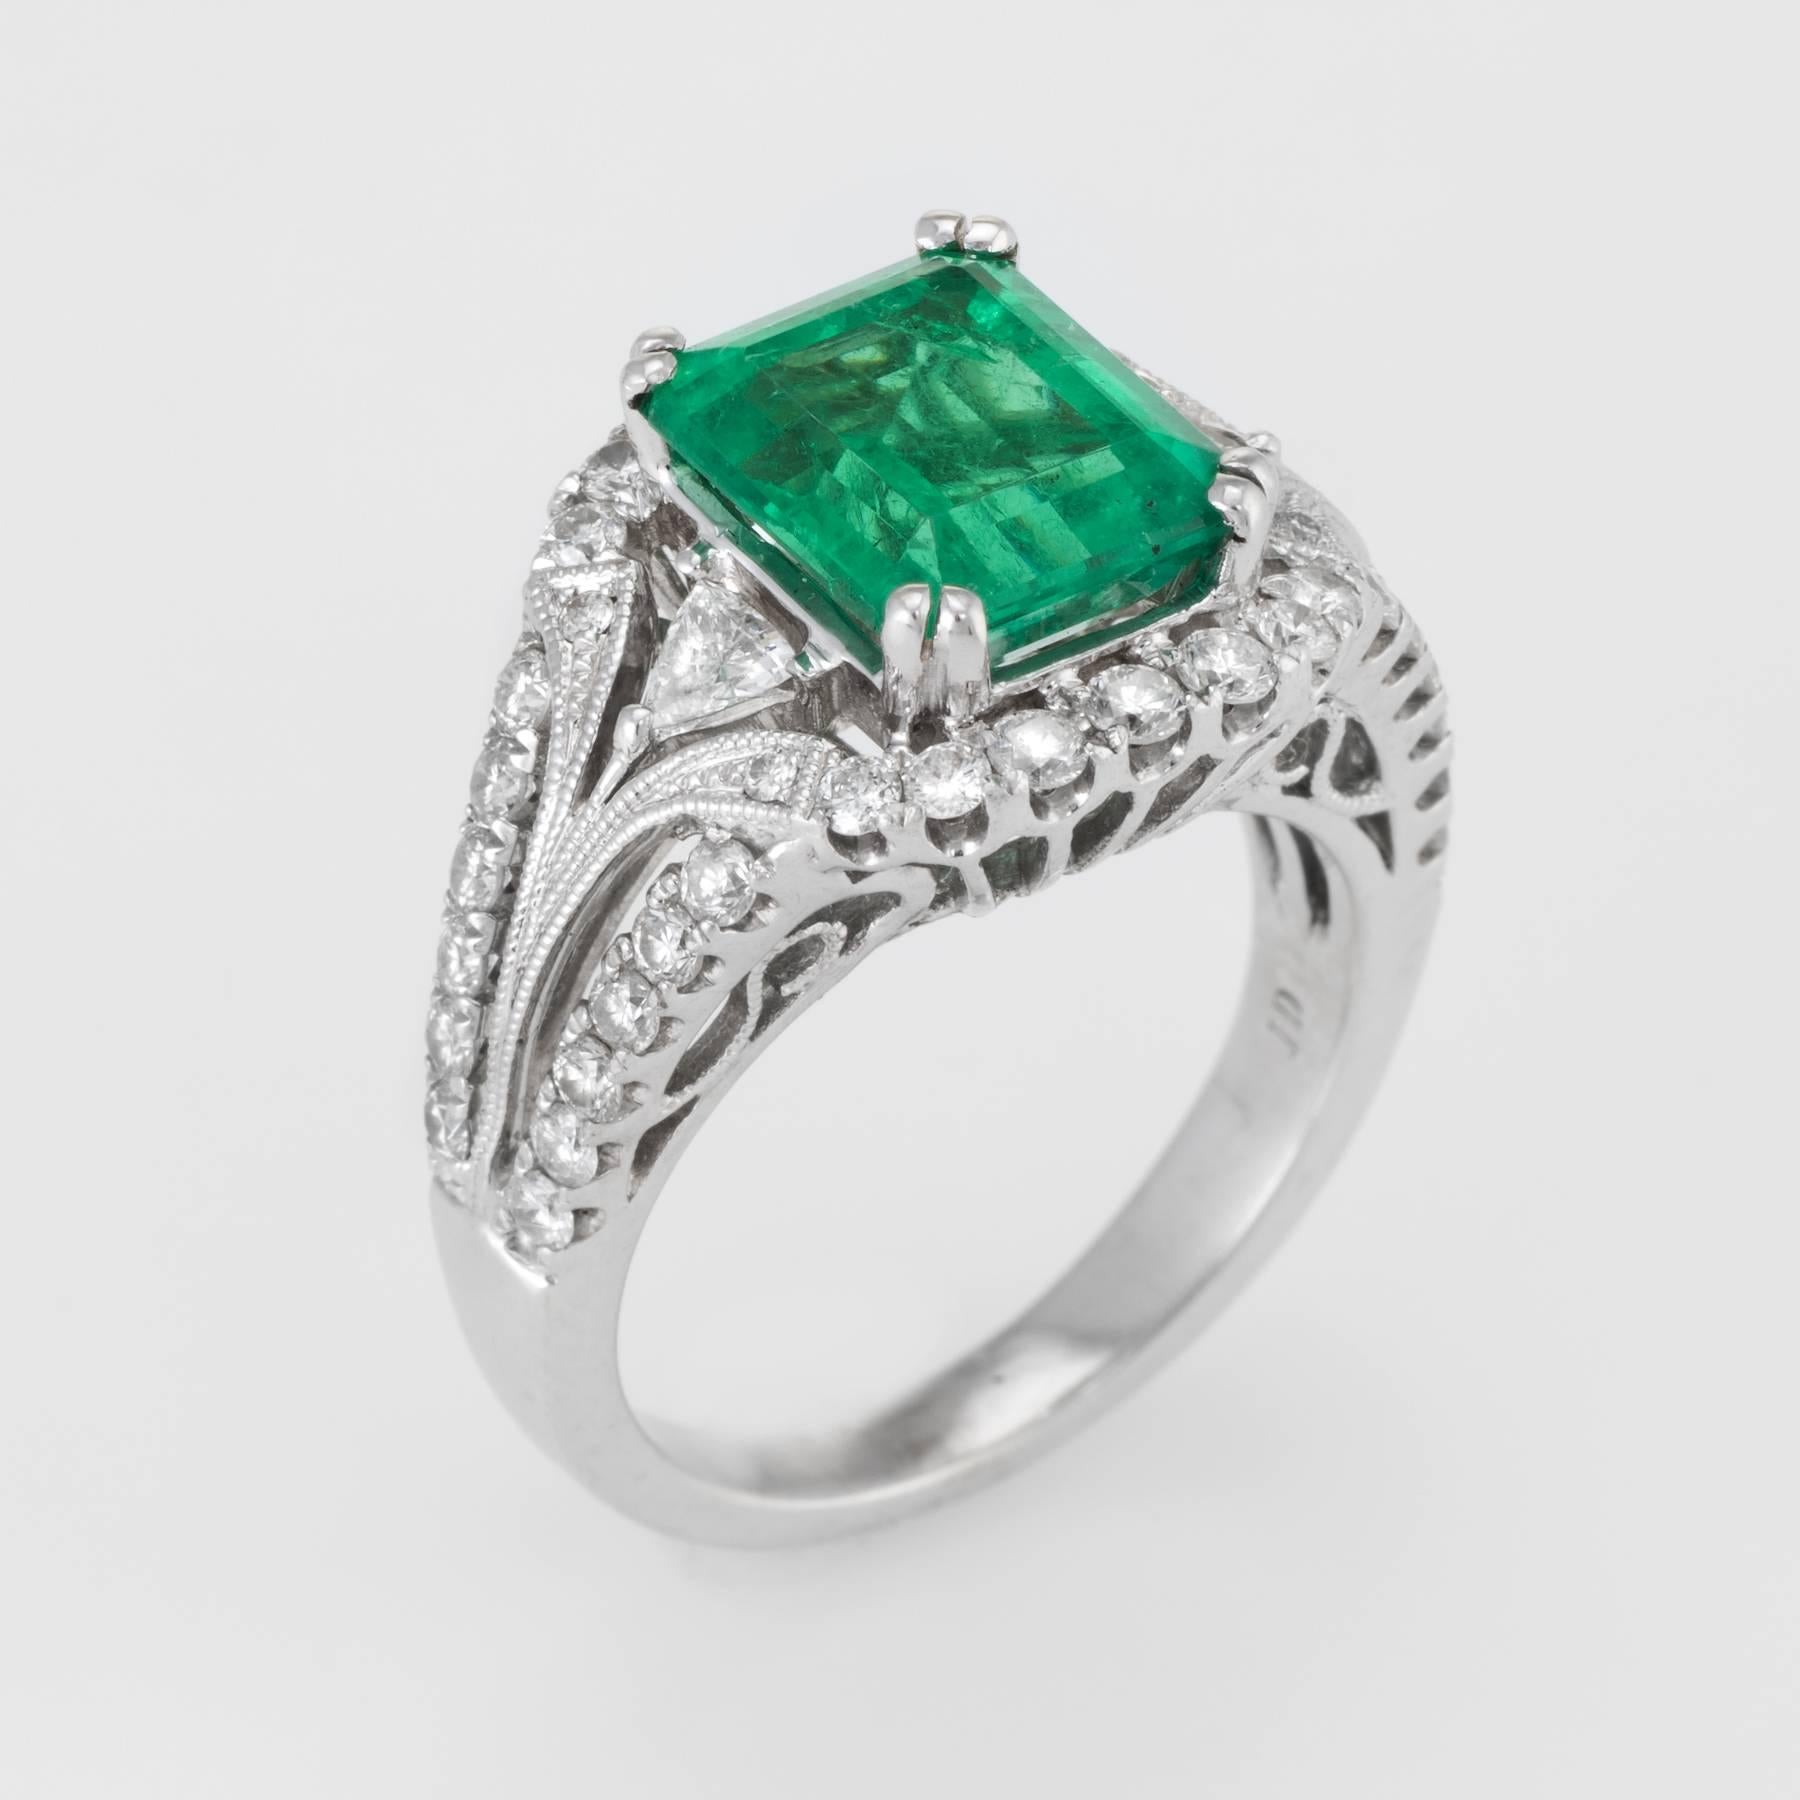 Elegant vintage cocktail ring (circa 1980s), crafted in 18 karat white gold. 

Centrally mounted emerald cut natural emerald measures 9.5mm x 8mm (estimated at 2.75 carats), accented with an estimated 1.20 carats of diamonds (estimated at H-I color